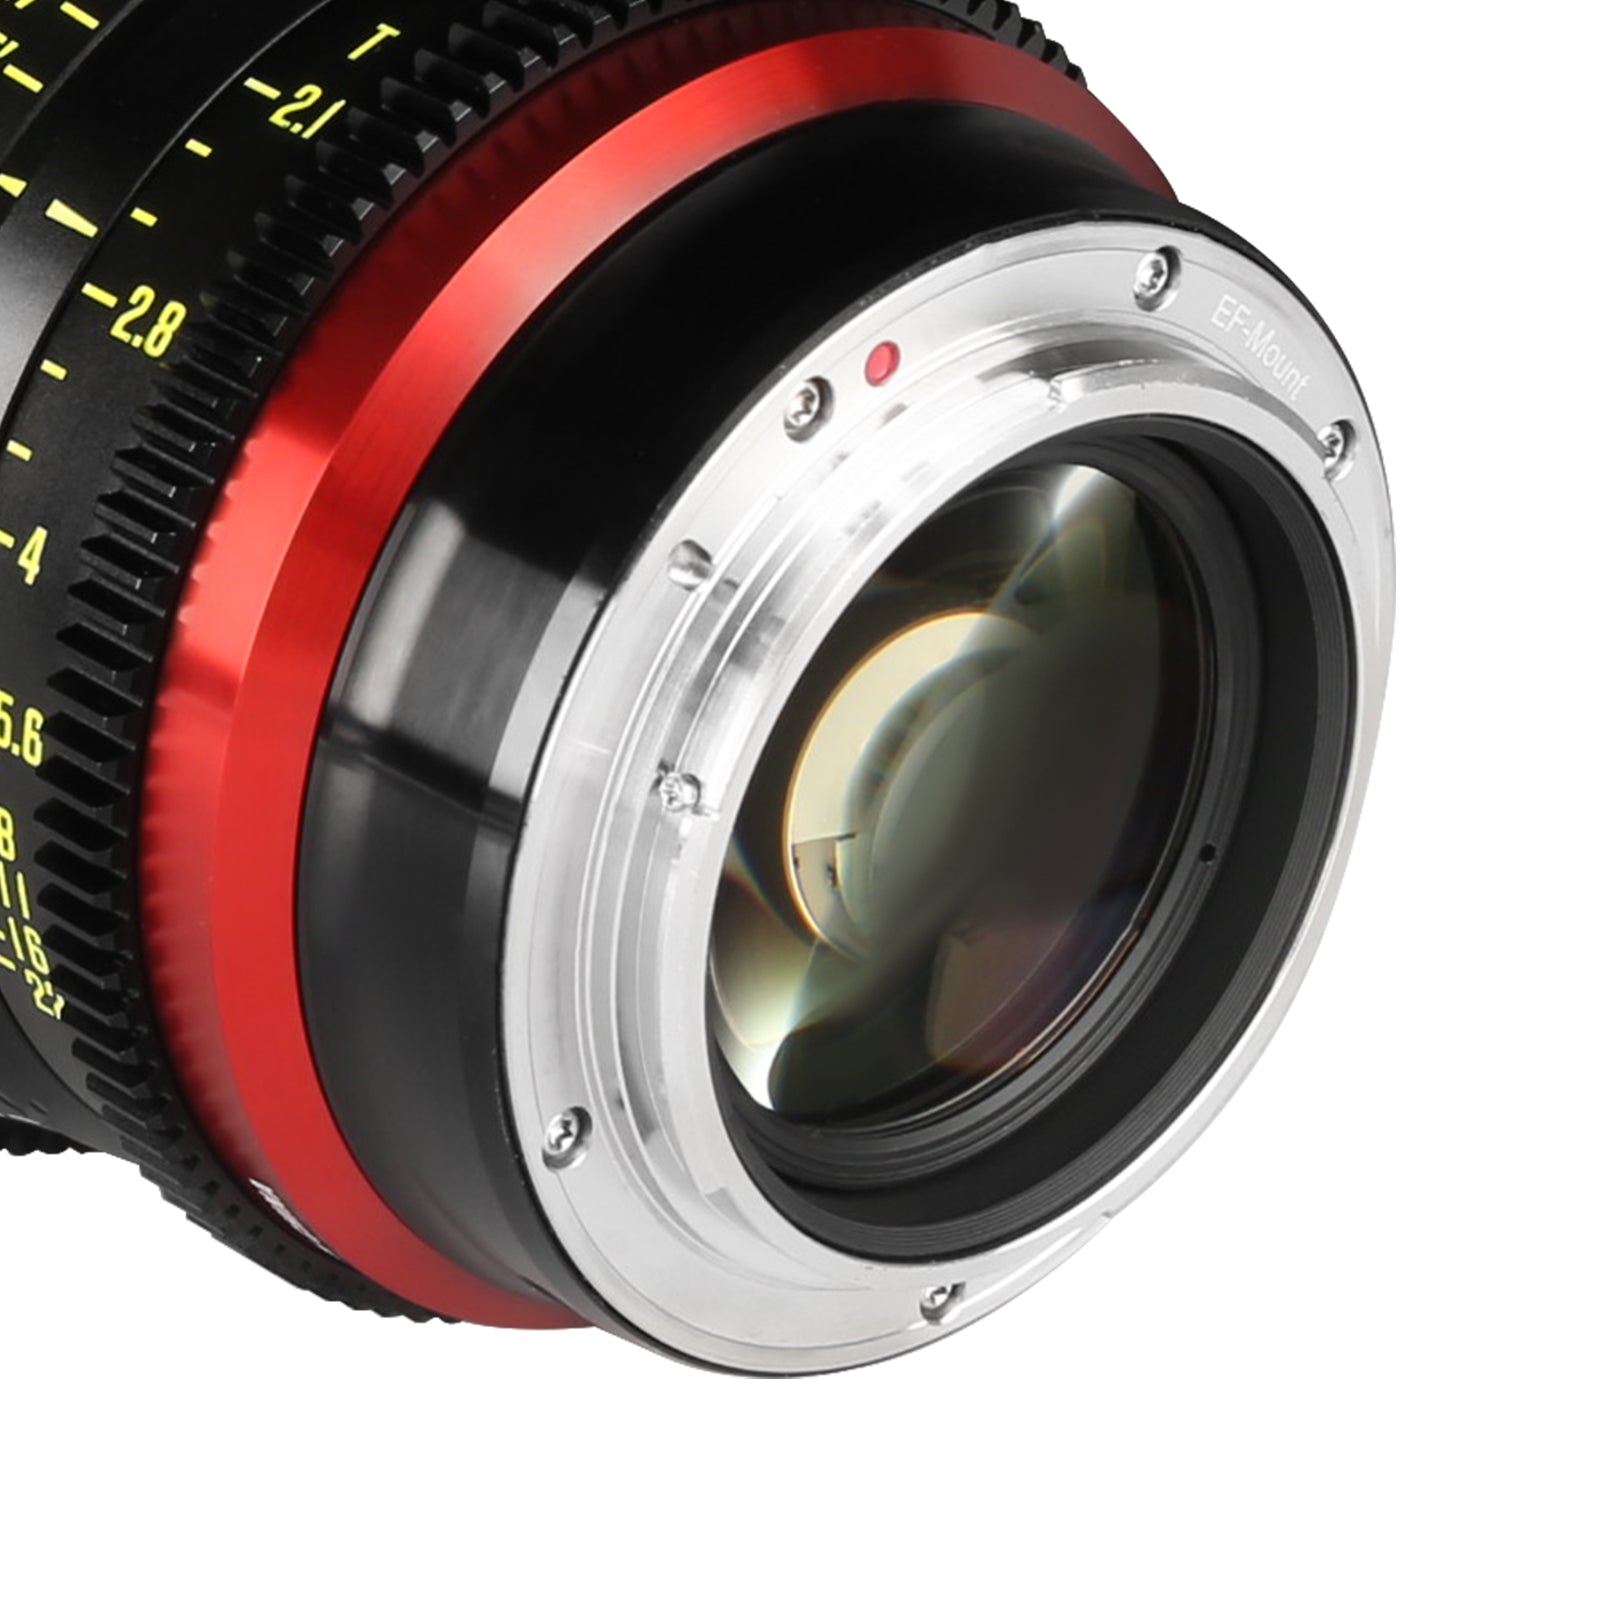 Meike Cinema Full Frame Cinema Prime 85mm T2.1 Lens (Sony E Mount in a Close-Up View)